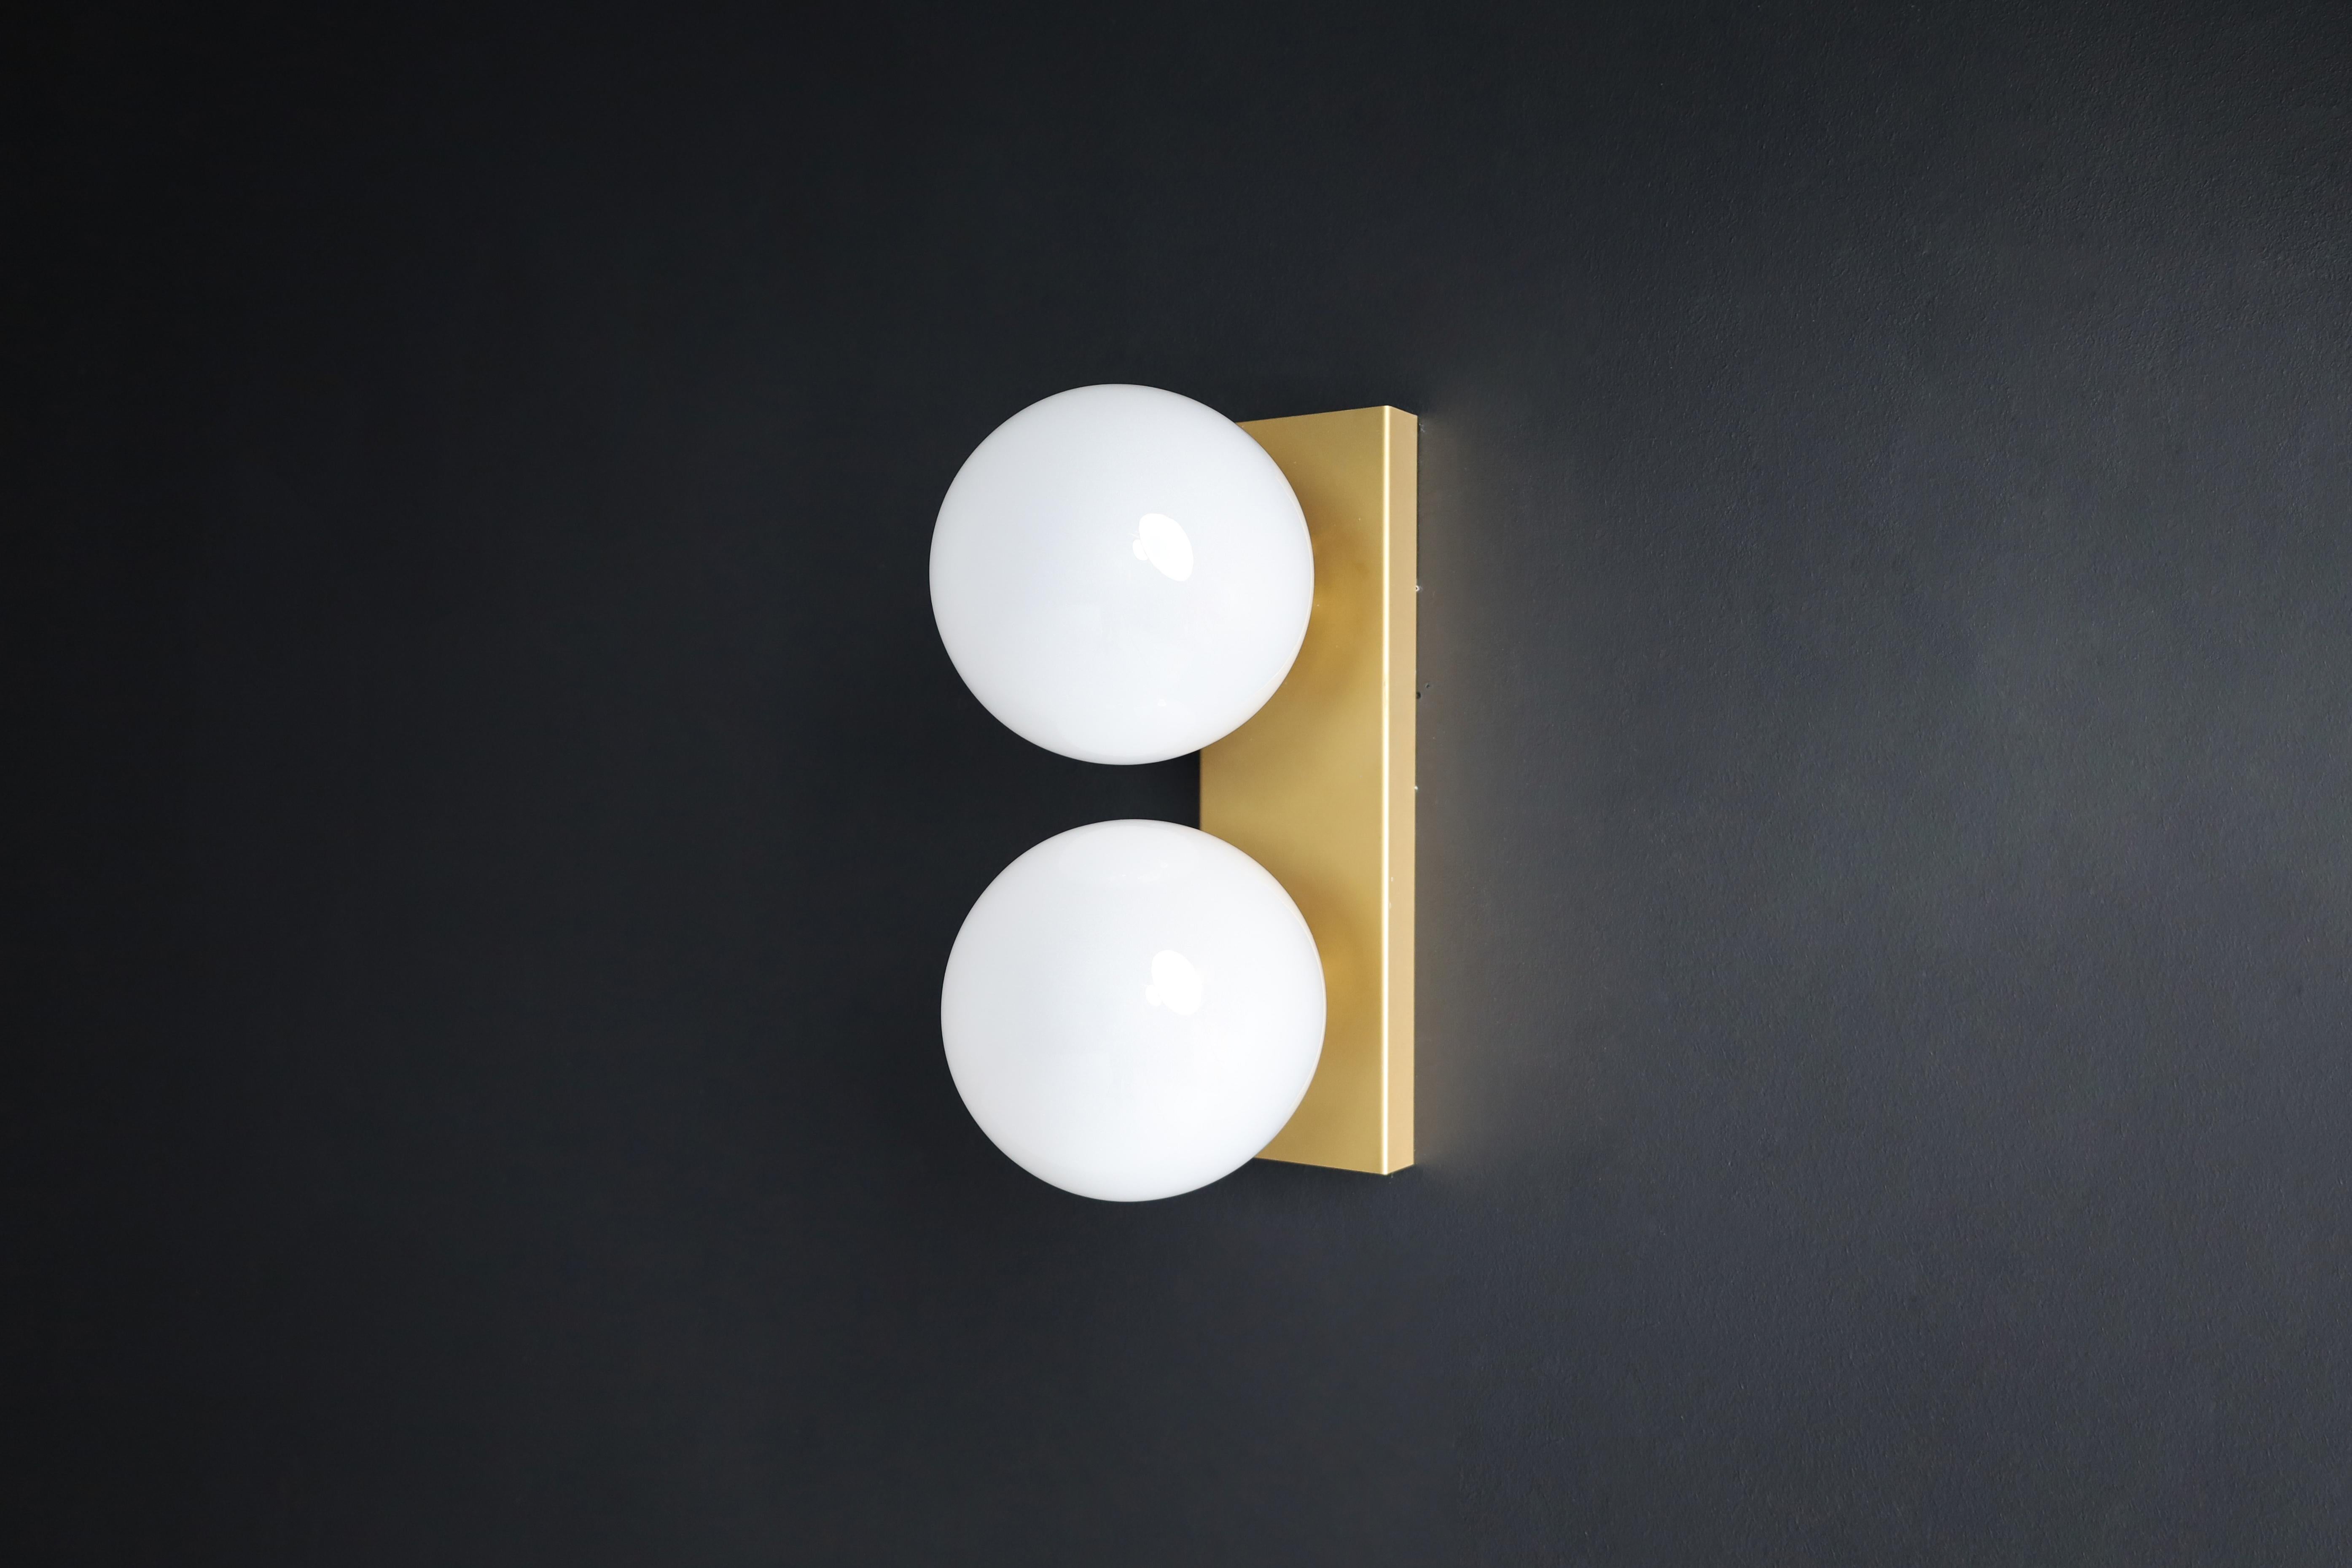 Mid-20th Century wall/ceiling lights white frosted glass globes, 1960s

Double wall sconces / ceiling lights with rectangular brass backplates and hand blew frosted glass globes. The bulbs are connected directly to a brass vertical/horizontal slat